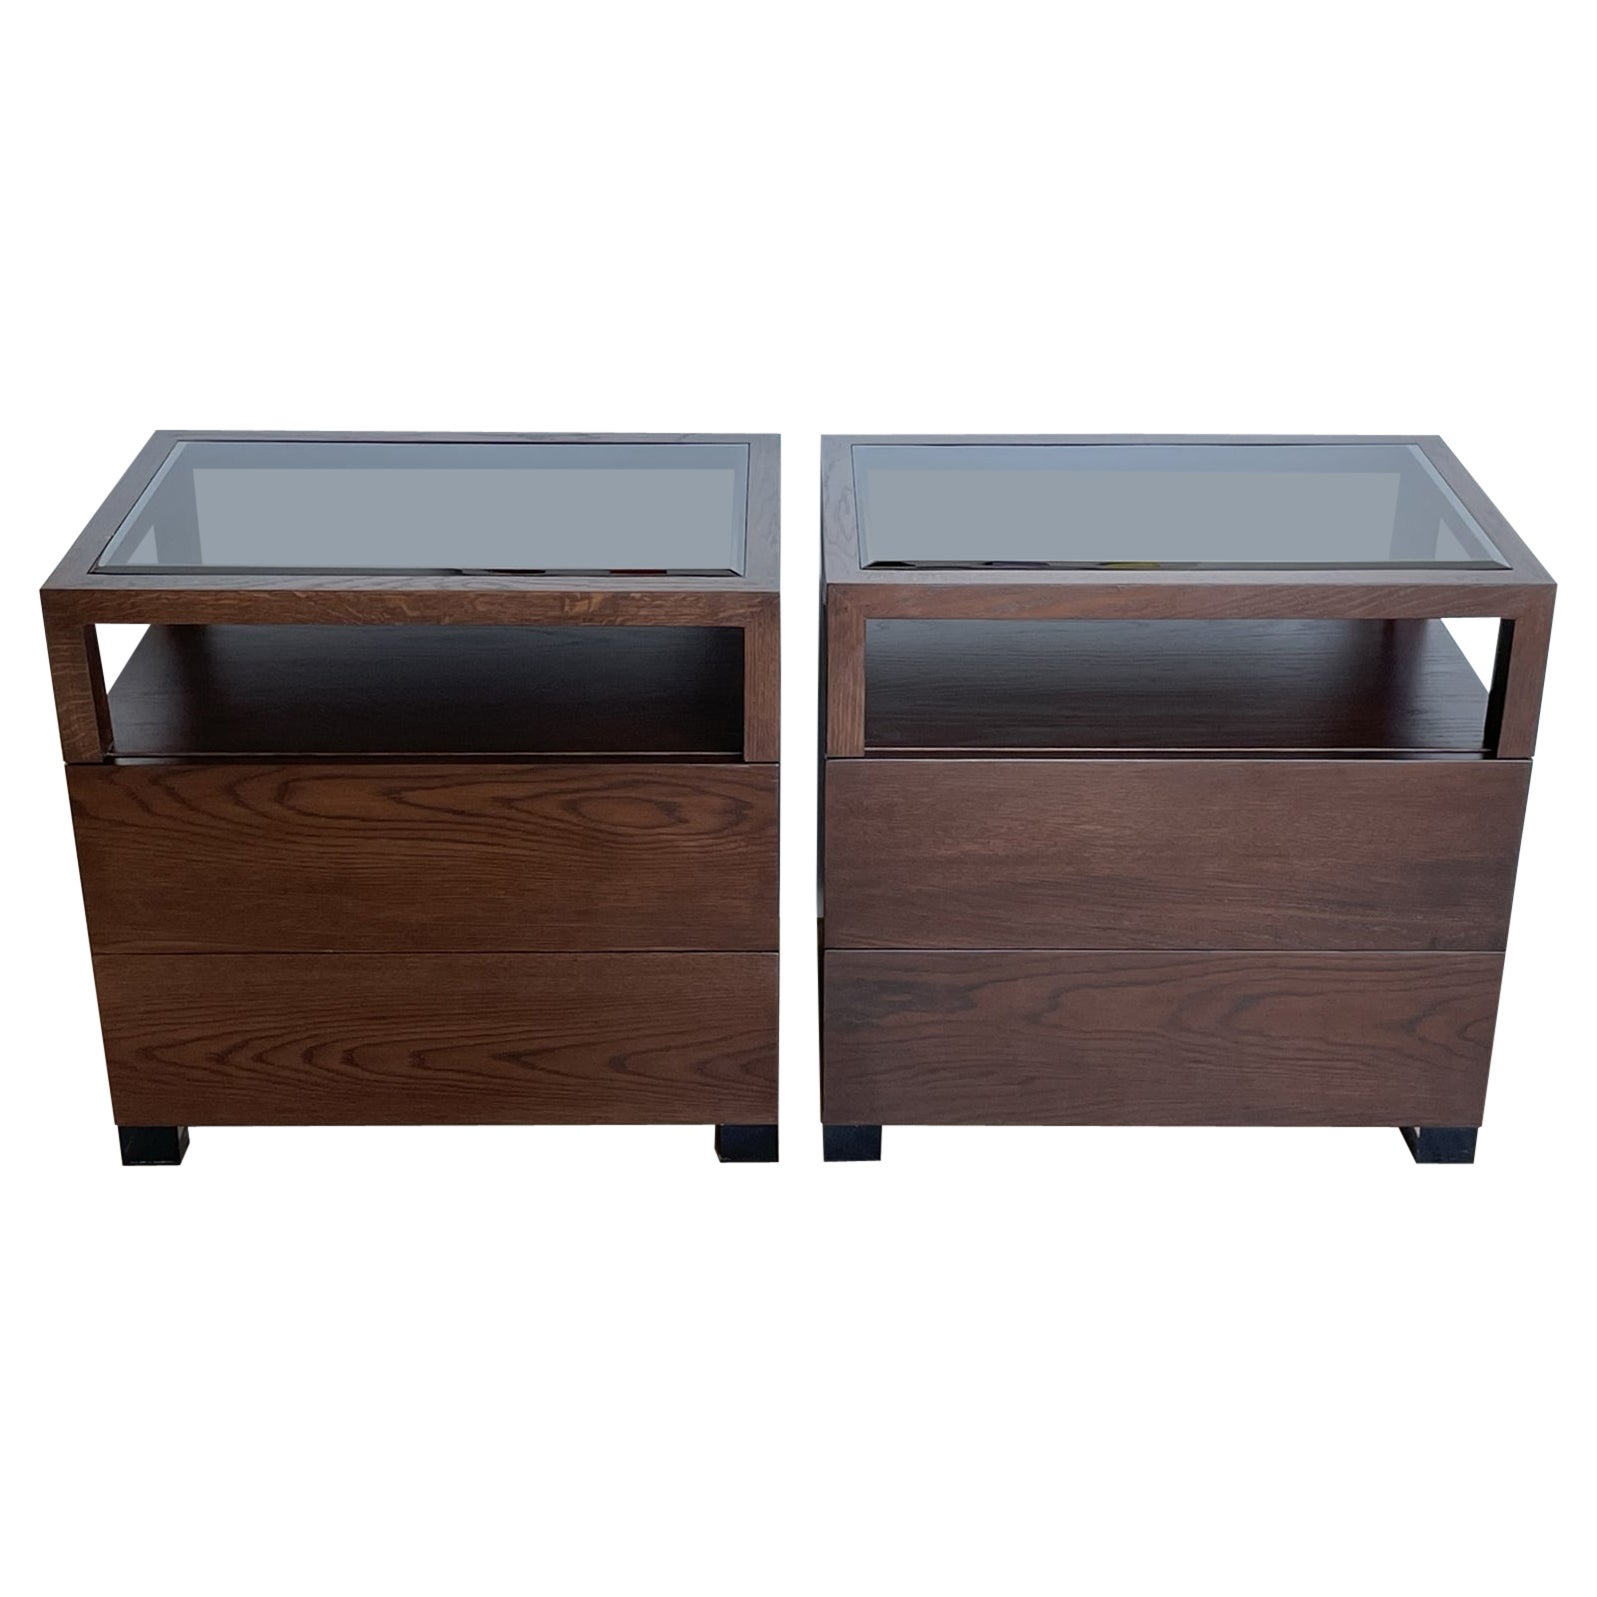 Pair of Nightstands by Cain Modern Made in Solid Oak and Bronzed Lucite